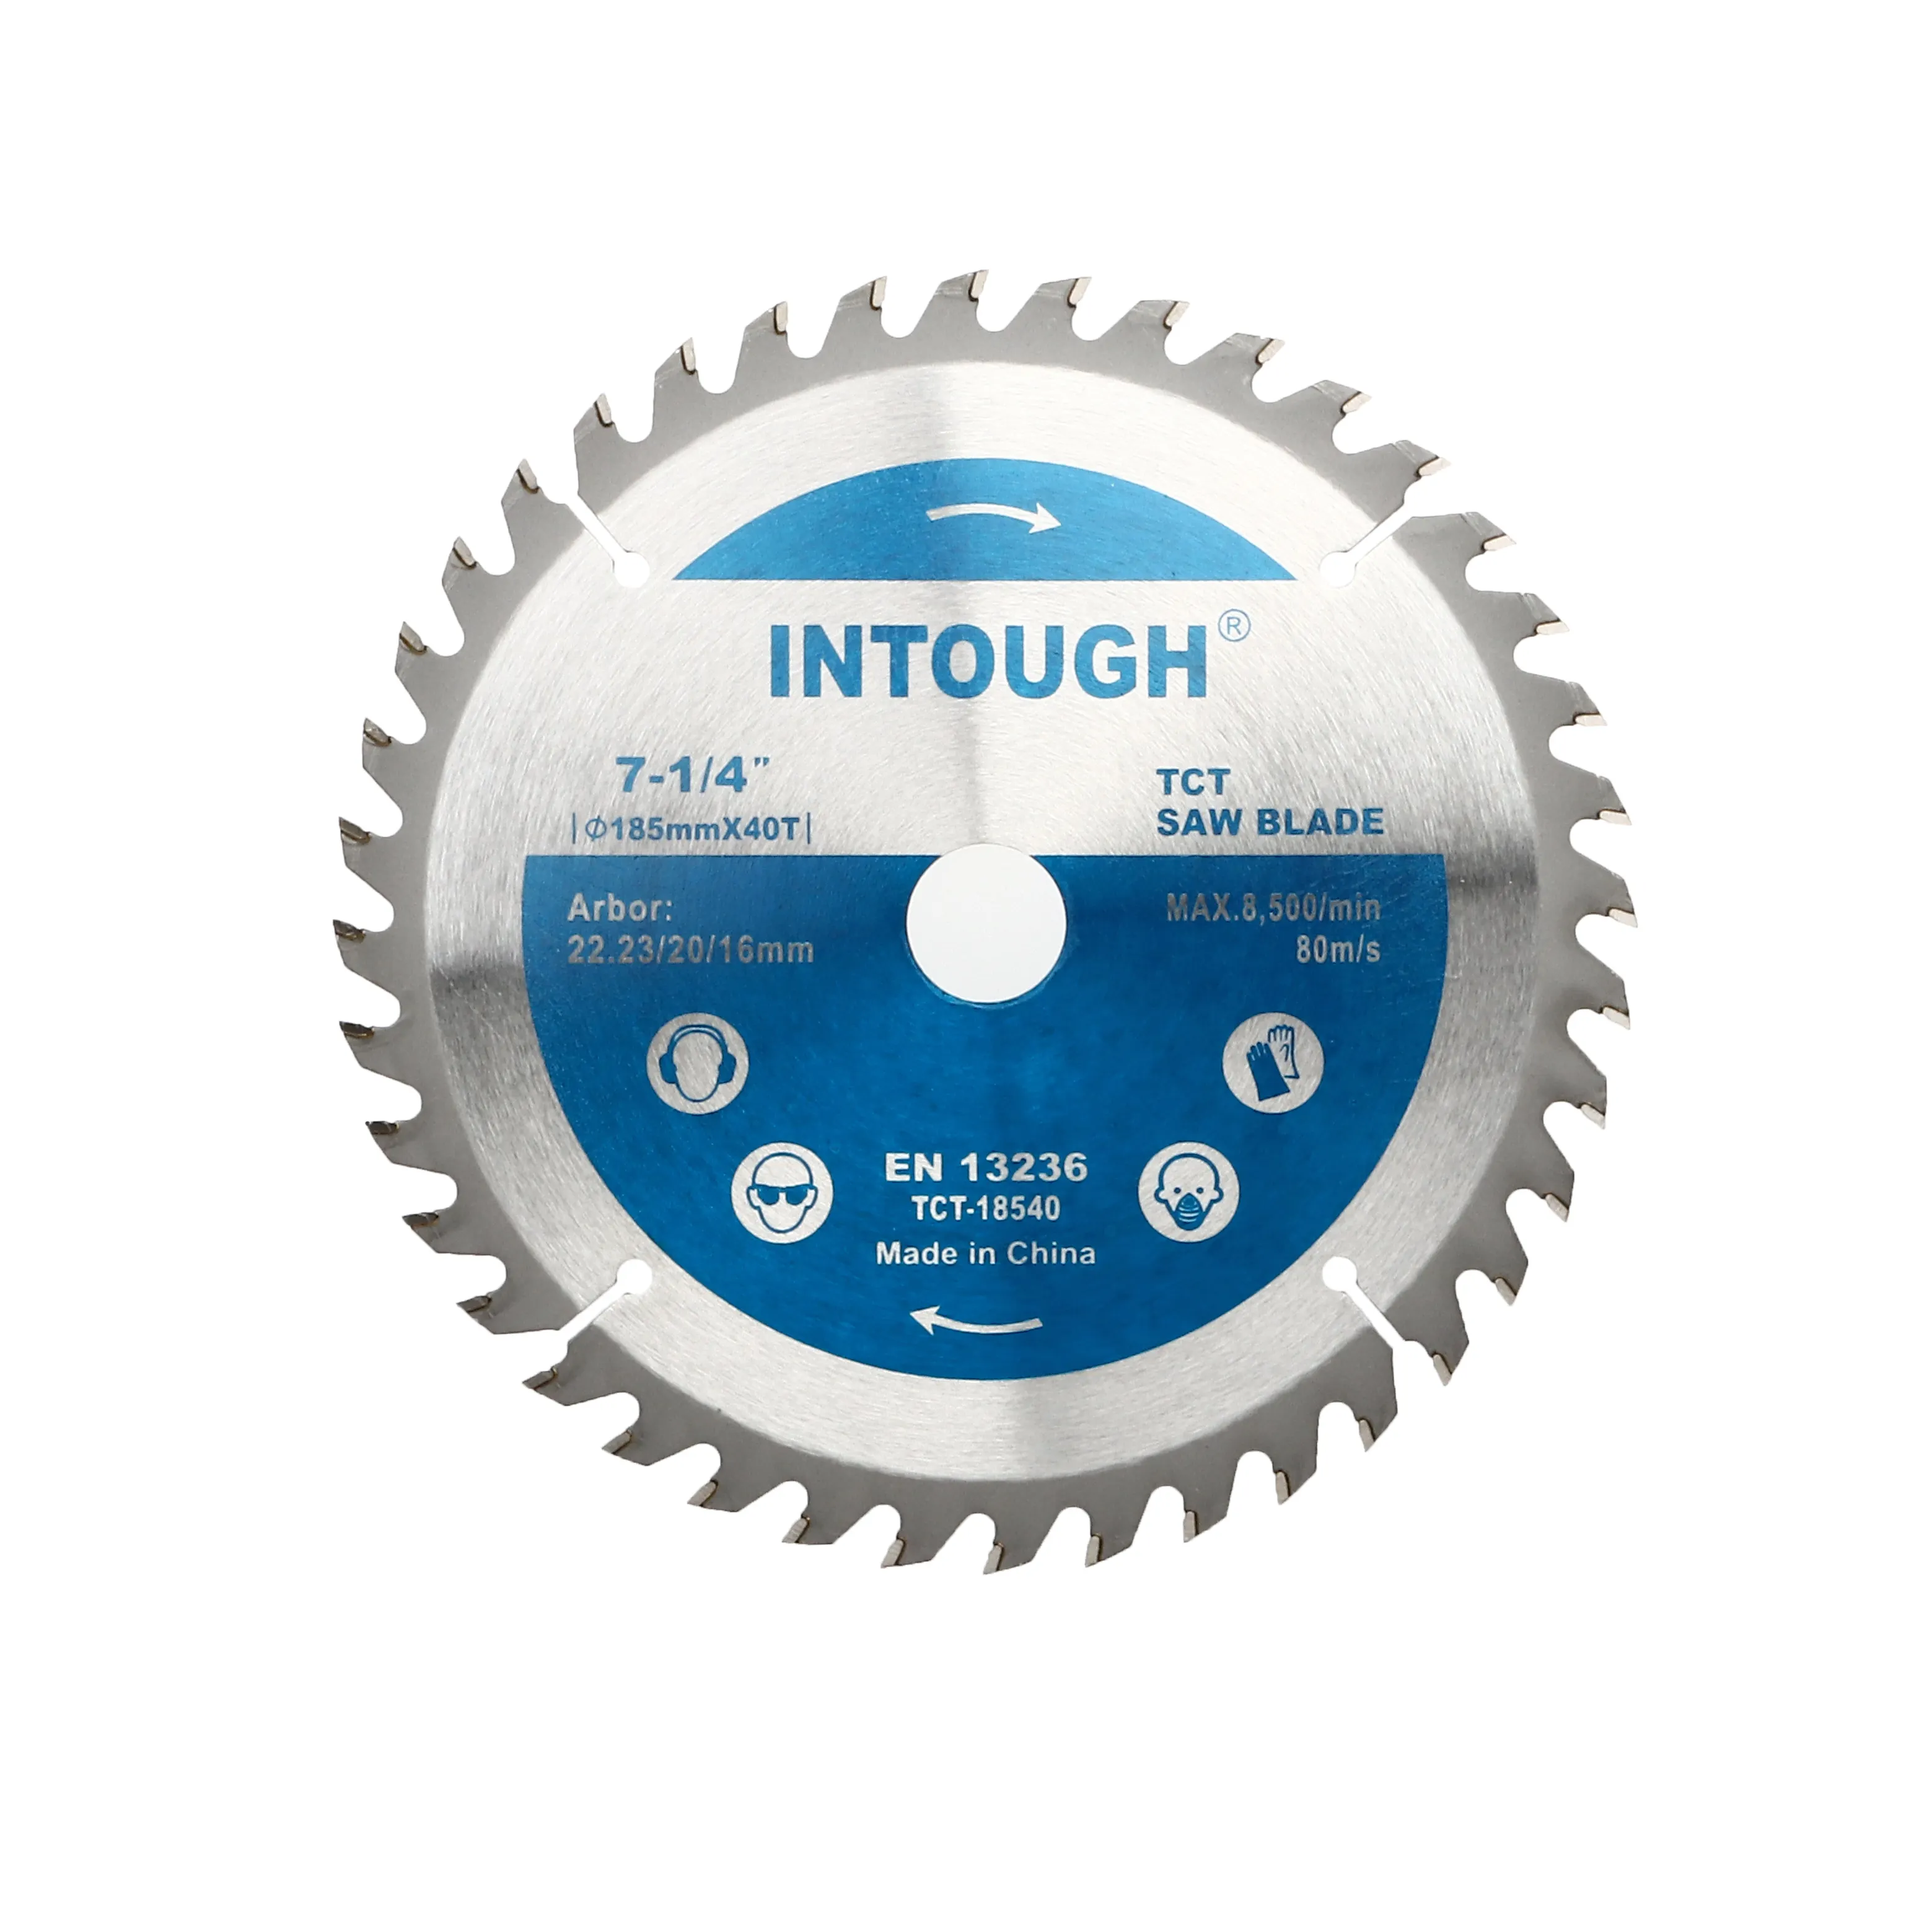 INTOUGH 185mm 40Teeth High Quality TCT Circular Saw Blade For Woodworking